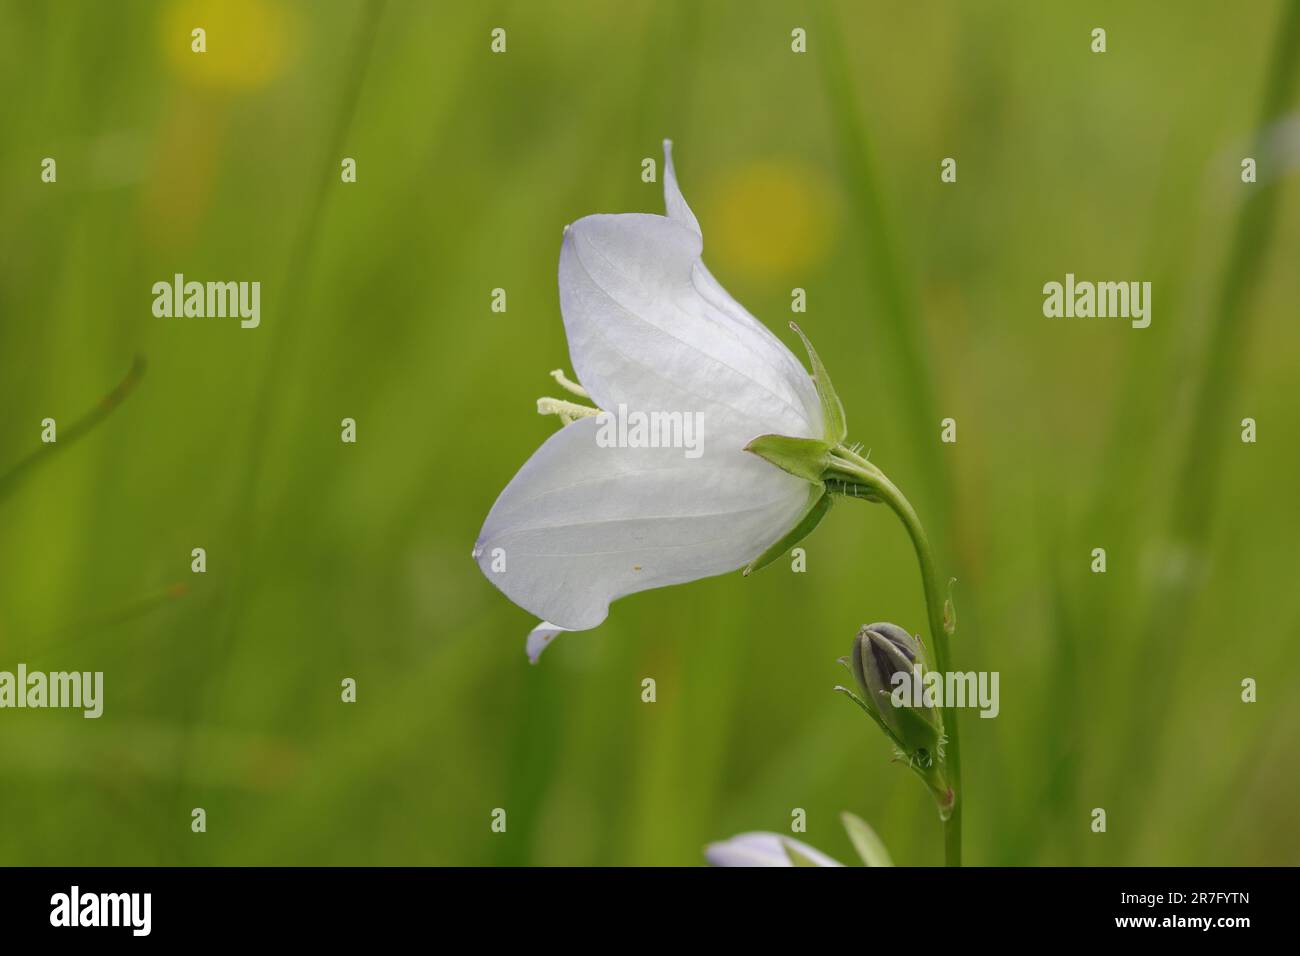 close-up of a beautiful white campanula persicifolia against a green blurry background, side view Stock Photo